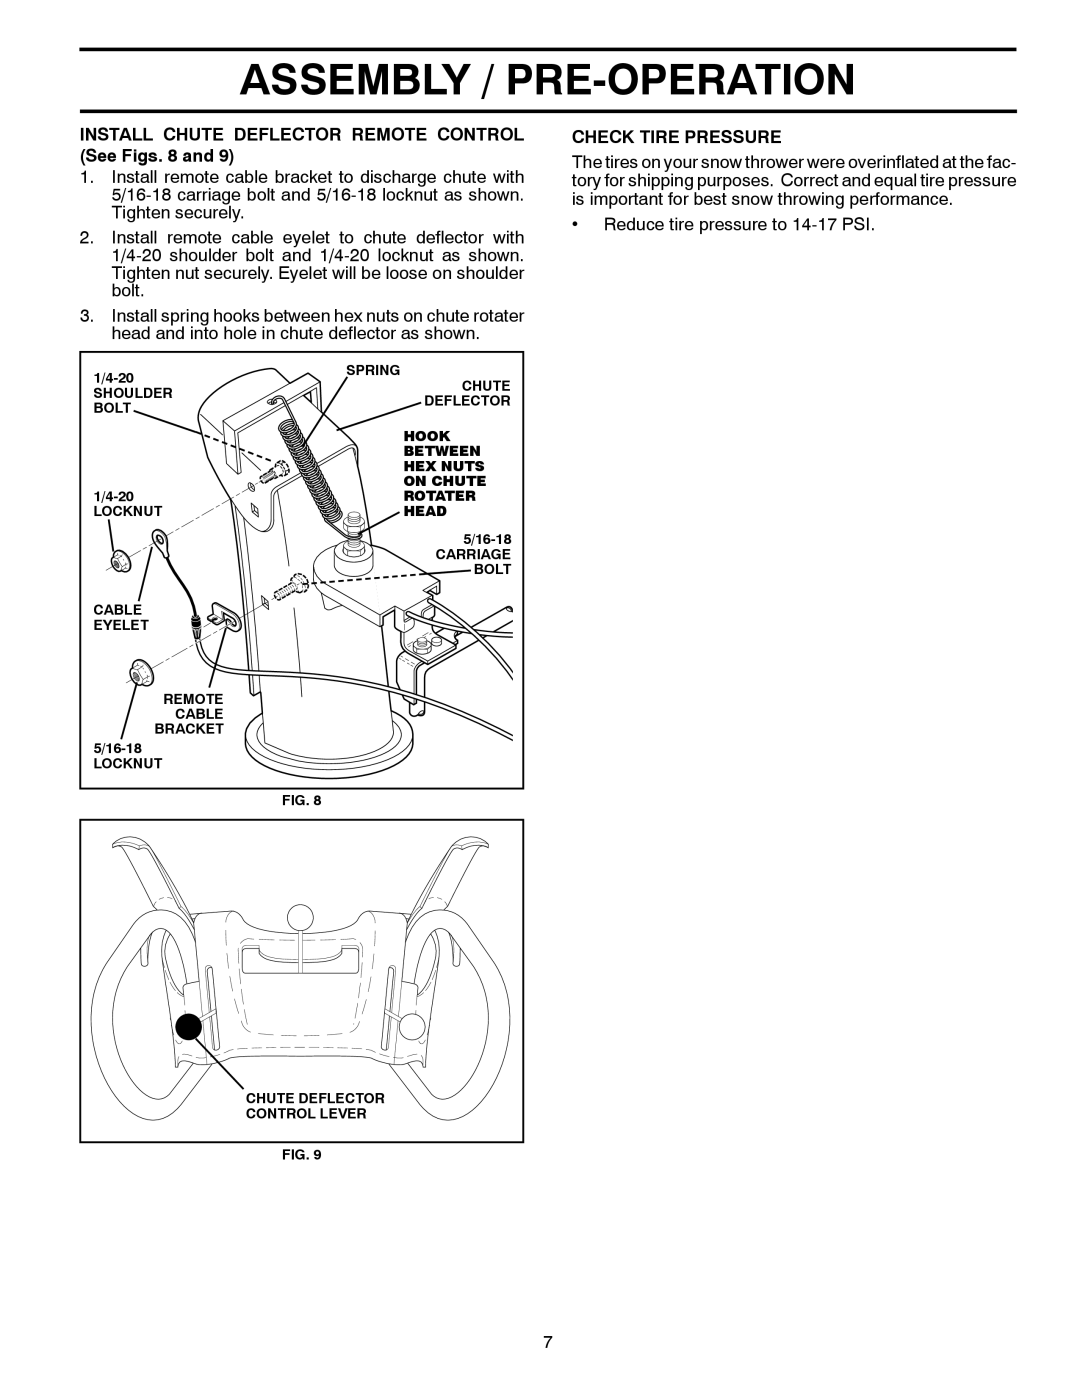 Poulan 96198002901 Assembly / Pre-Operation, INSTALL CHUTE DEFLECTOR REMOTE CONTROL See Figs. 8 and, Check Tire Pressure 